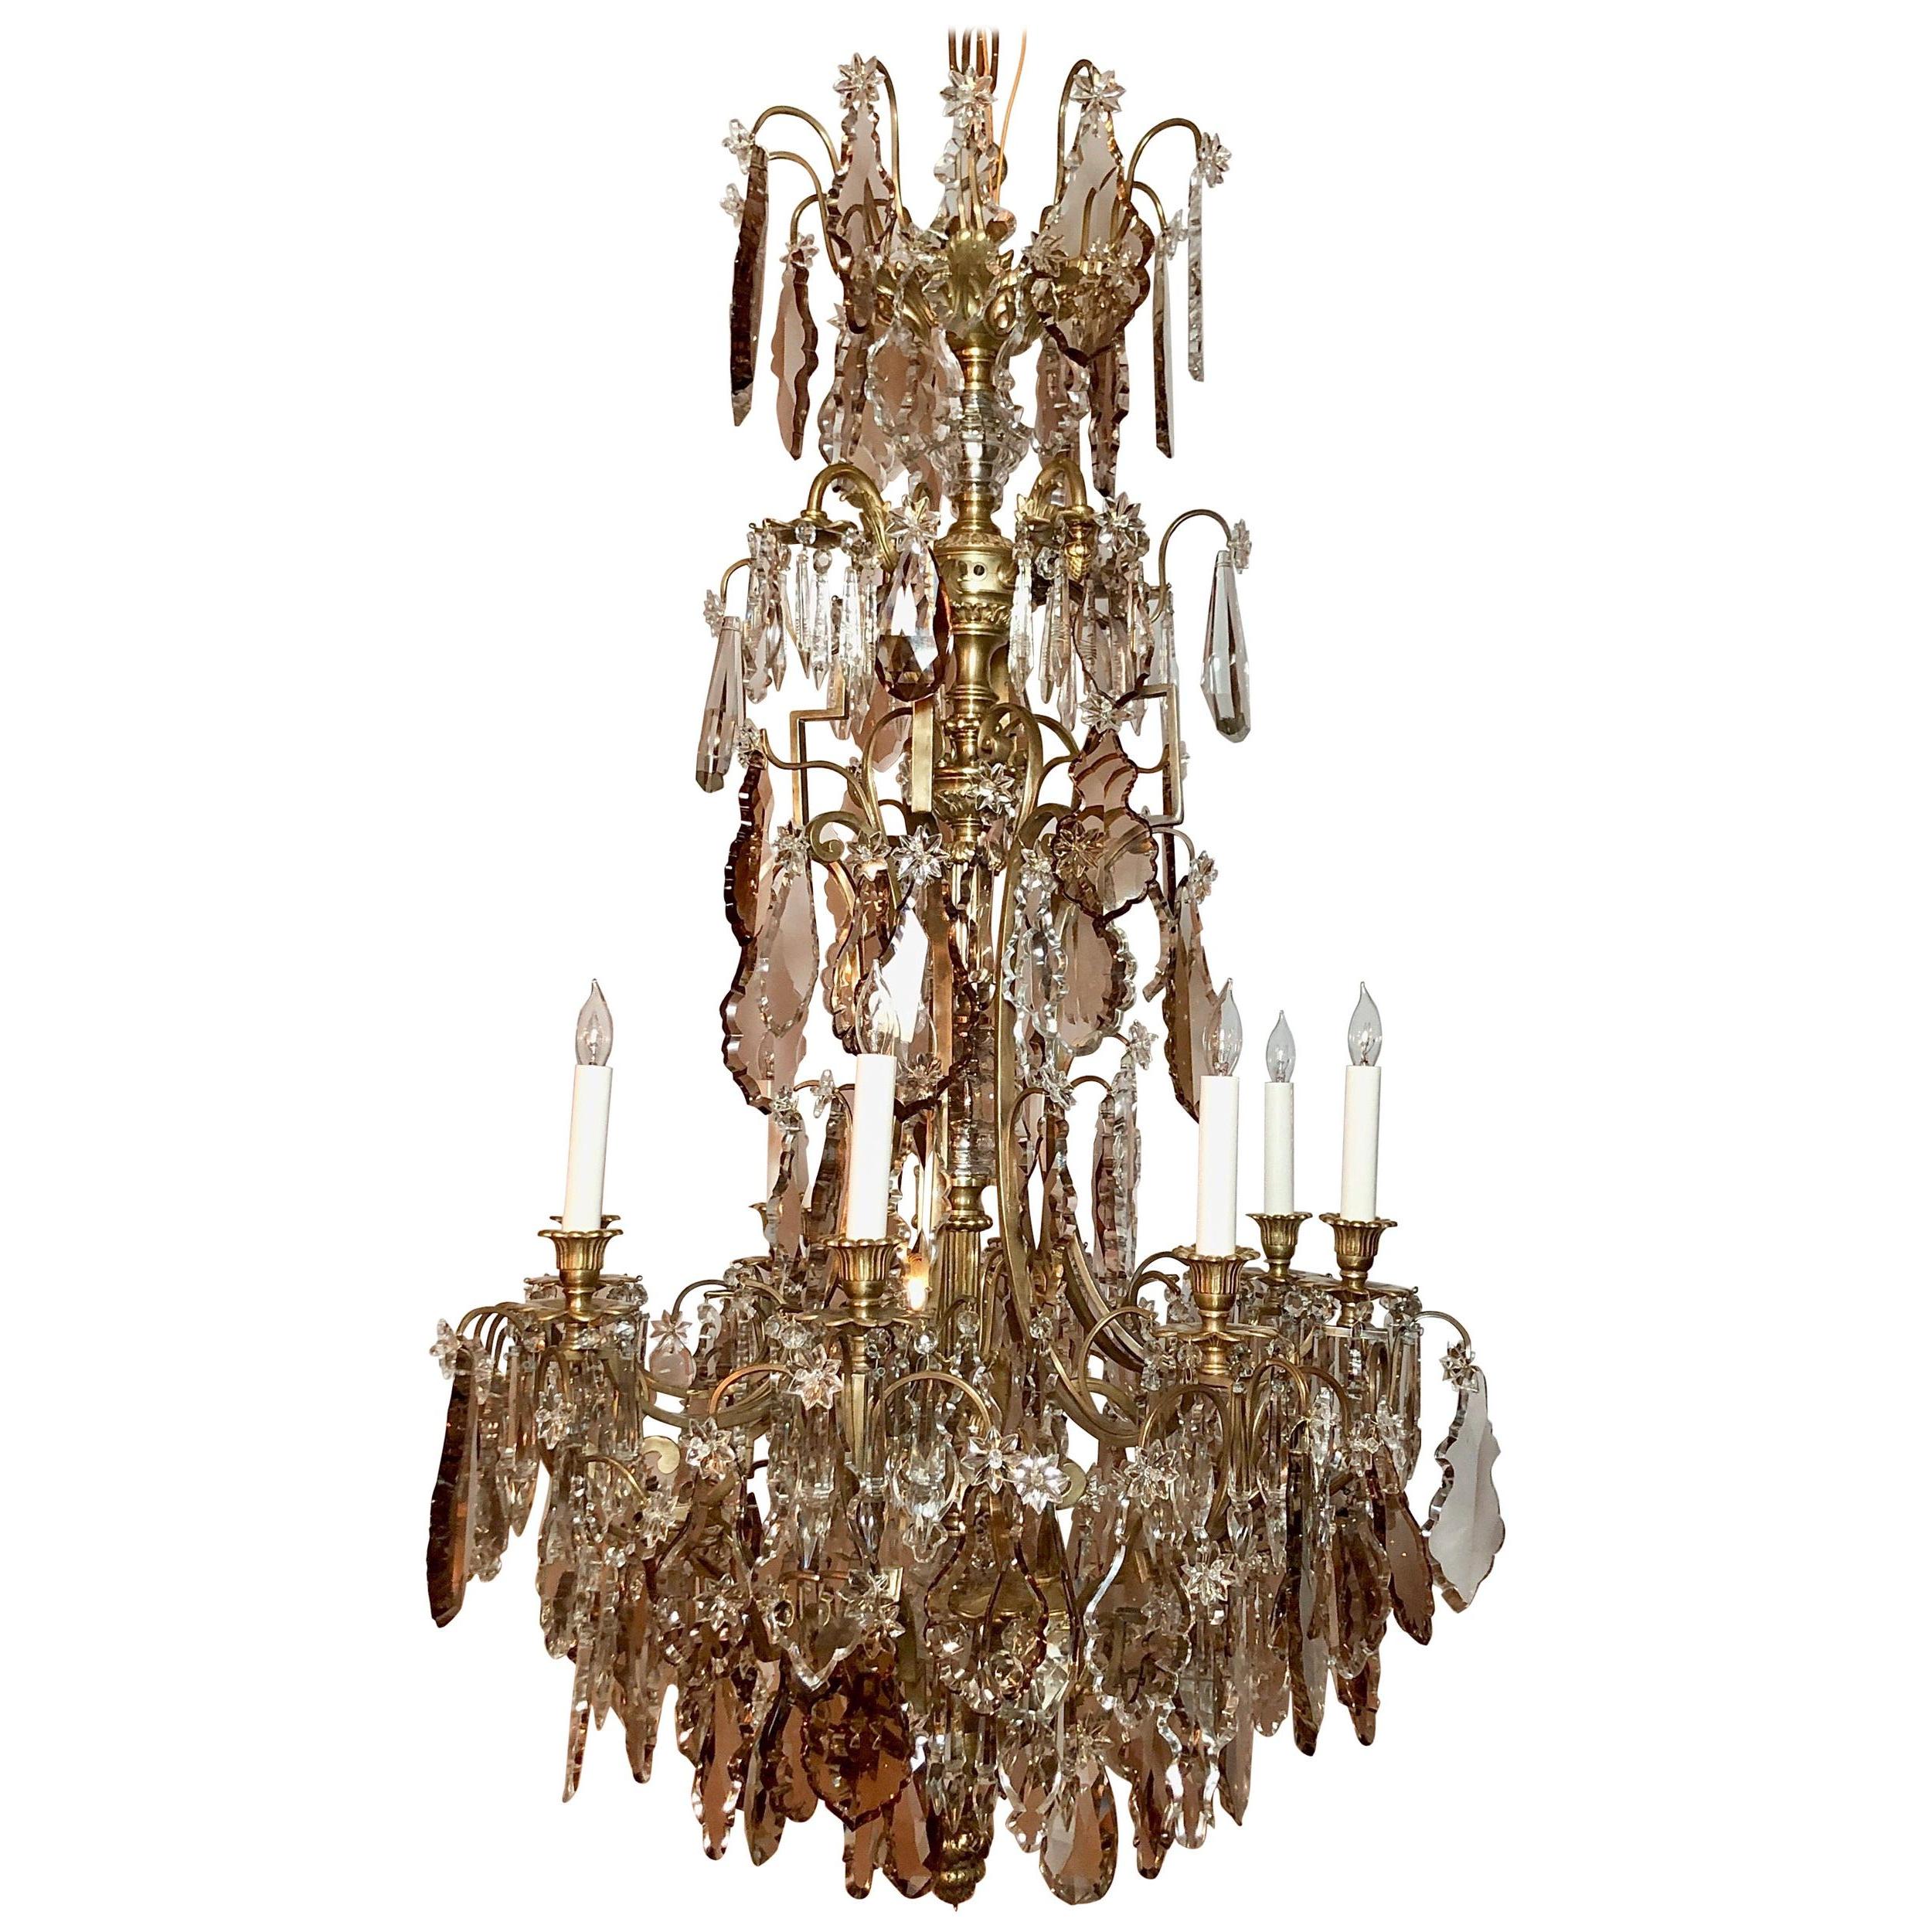 Antique French Gold Bronze & All Original Baccarat Crystal Chandelier Circa 1870